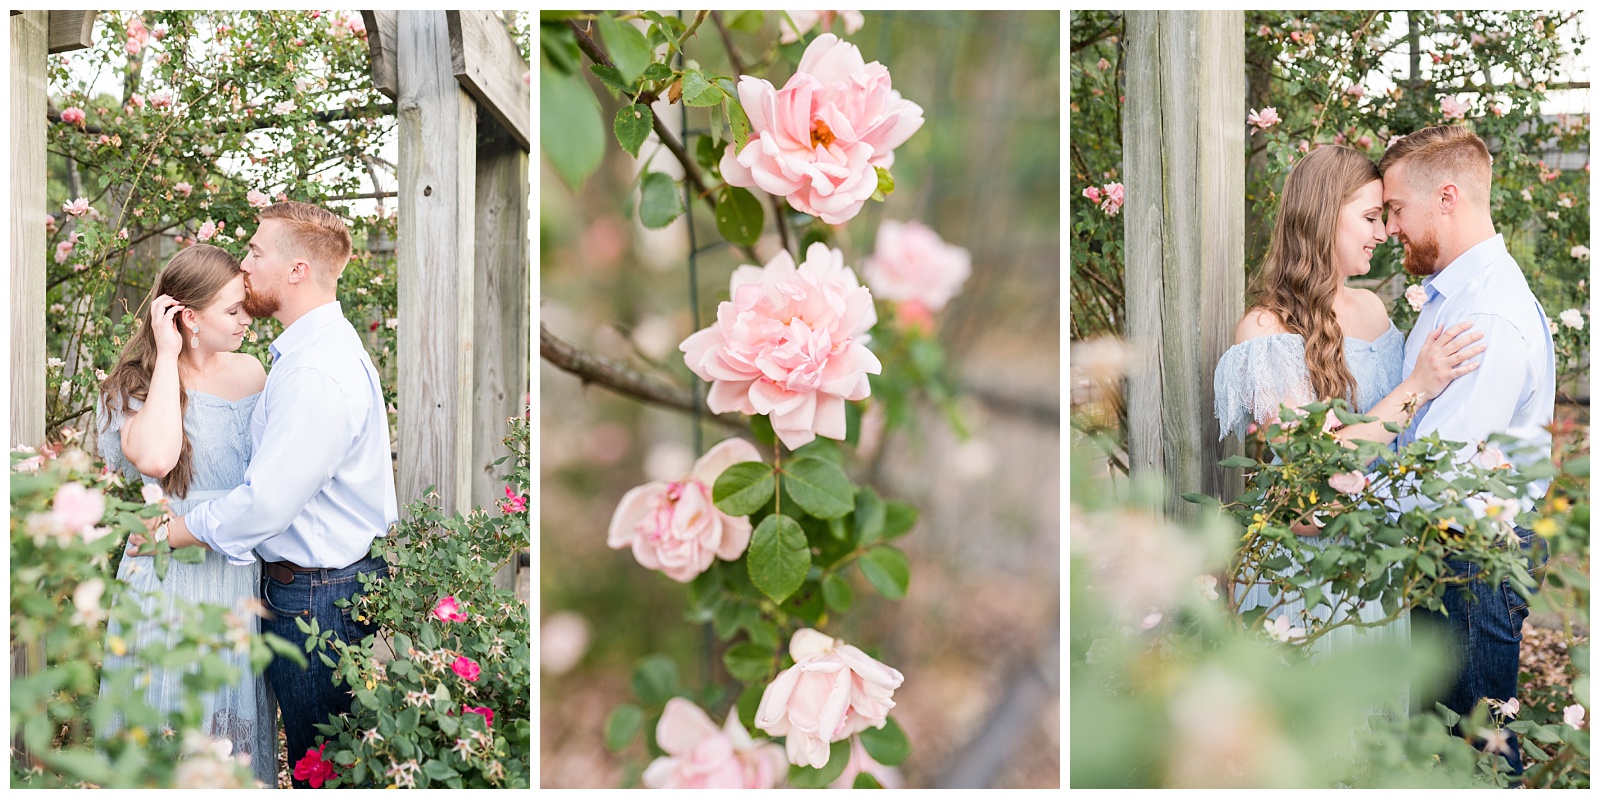 Romantic engagement session portraits in a rose garden in north carolina